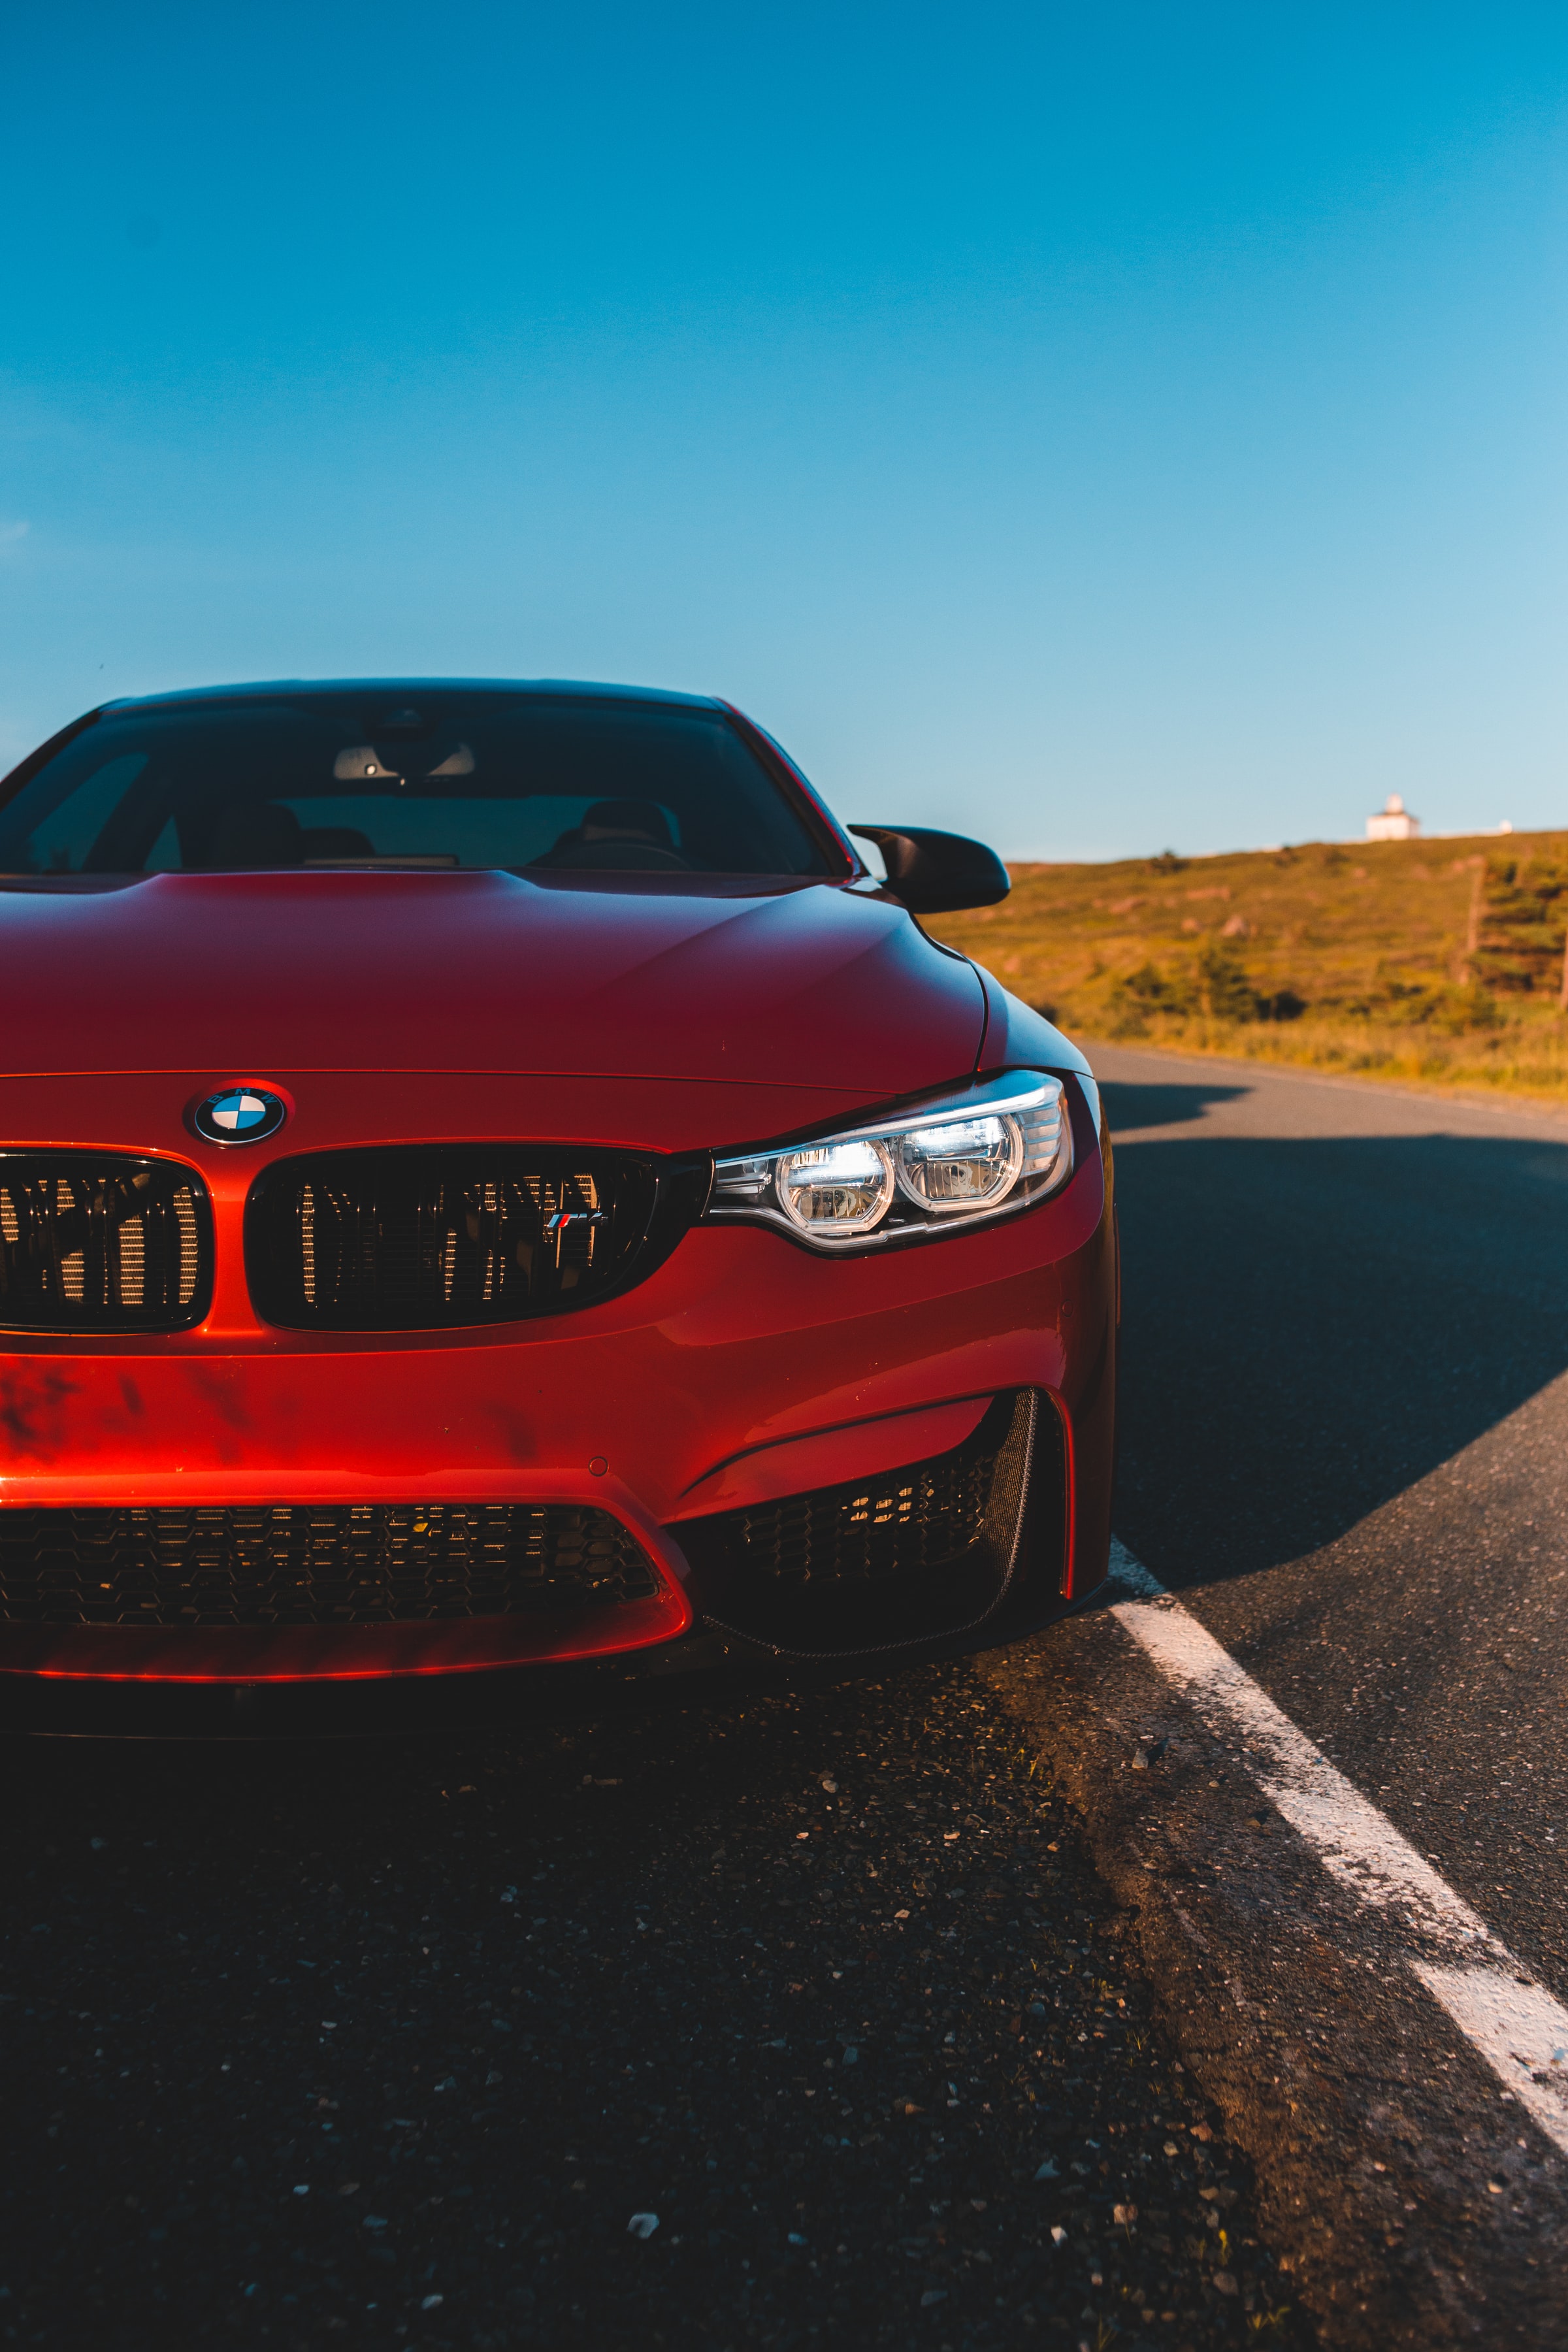 bmw m4, bmw, cars, red, car, front view, headlight